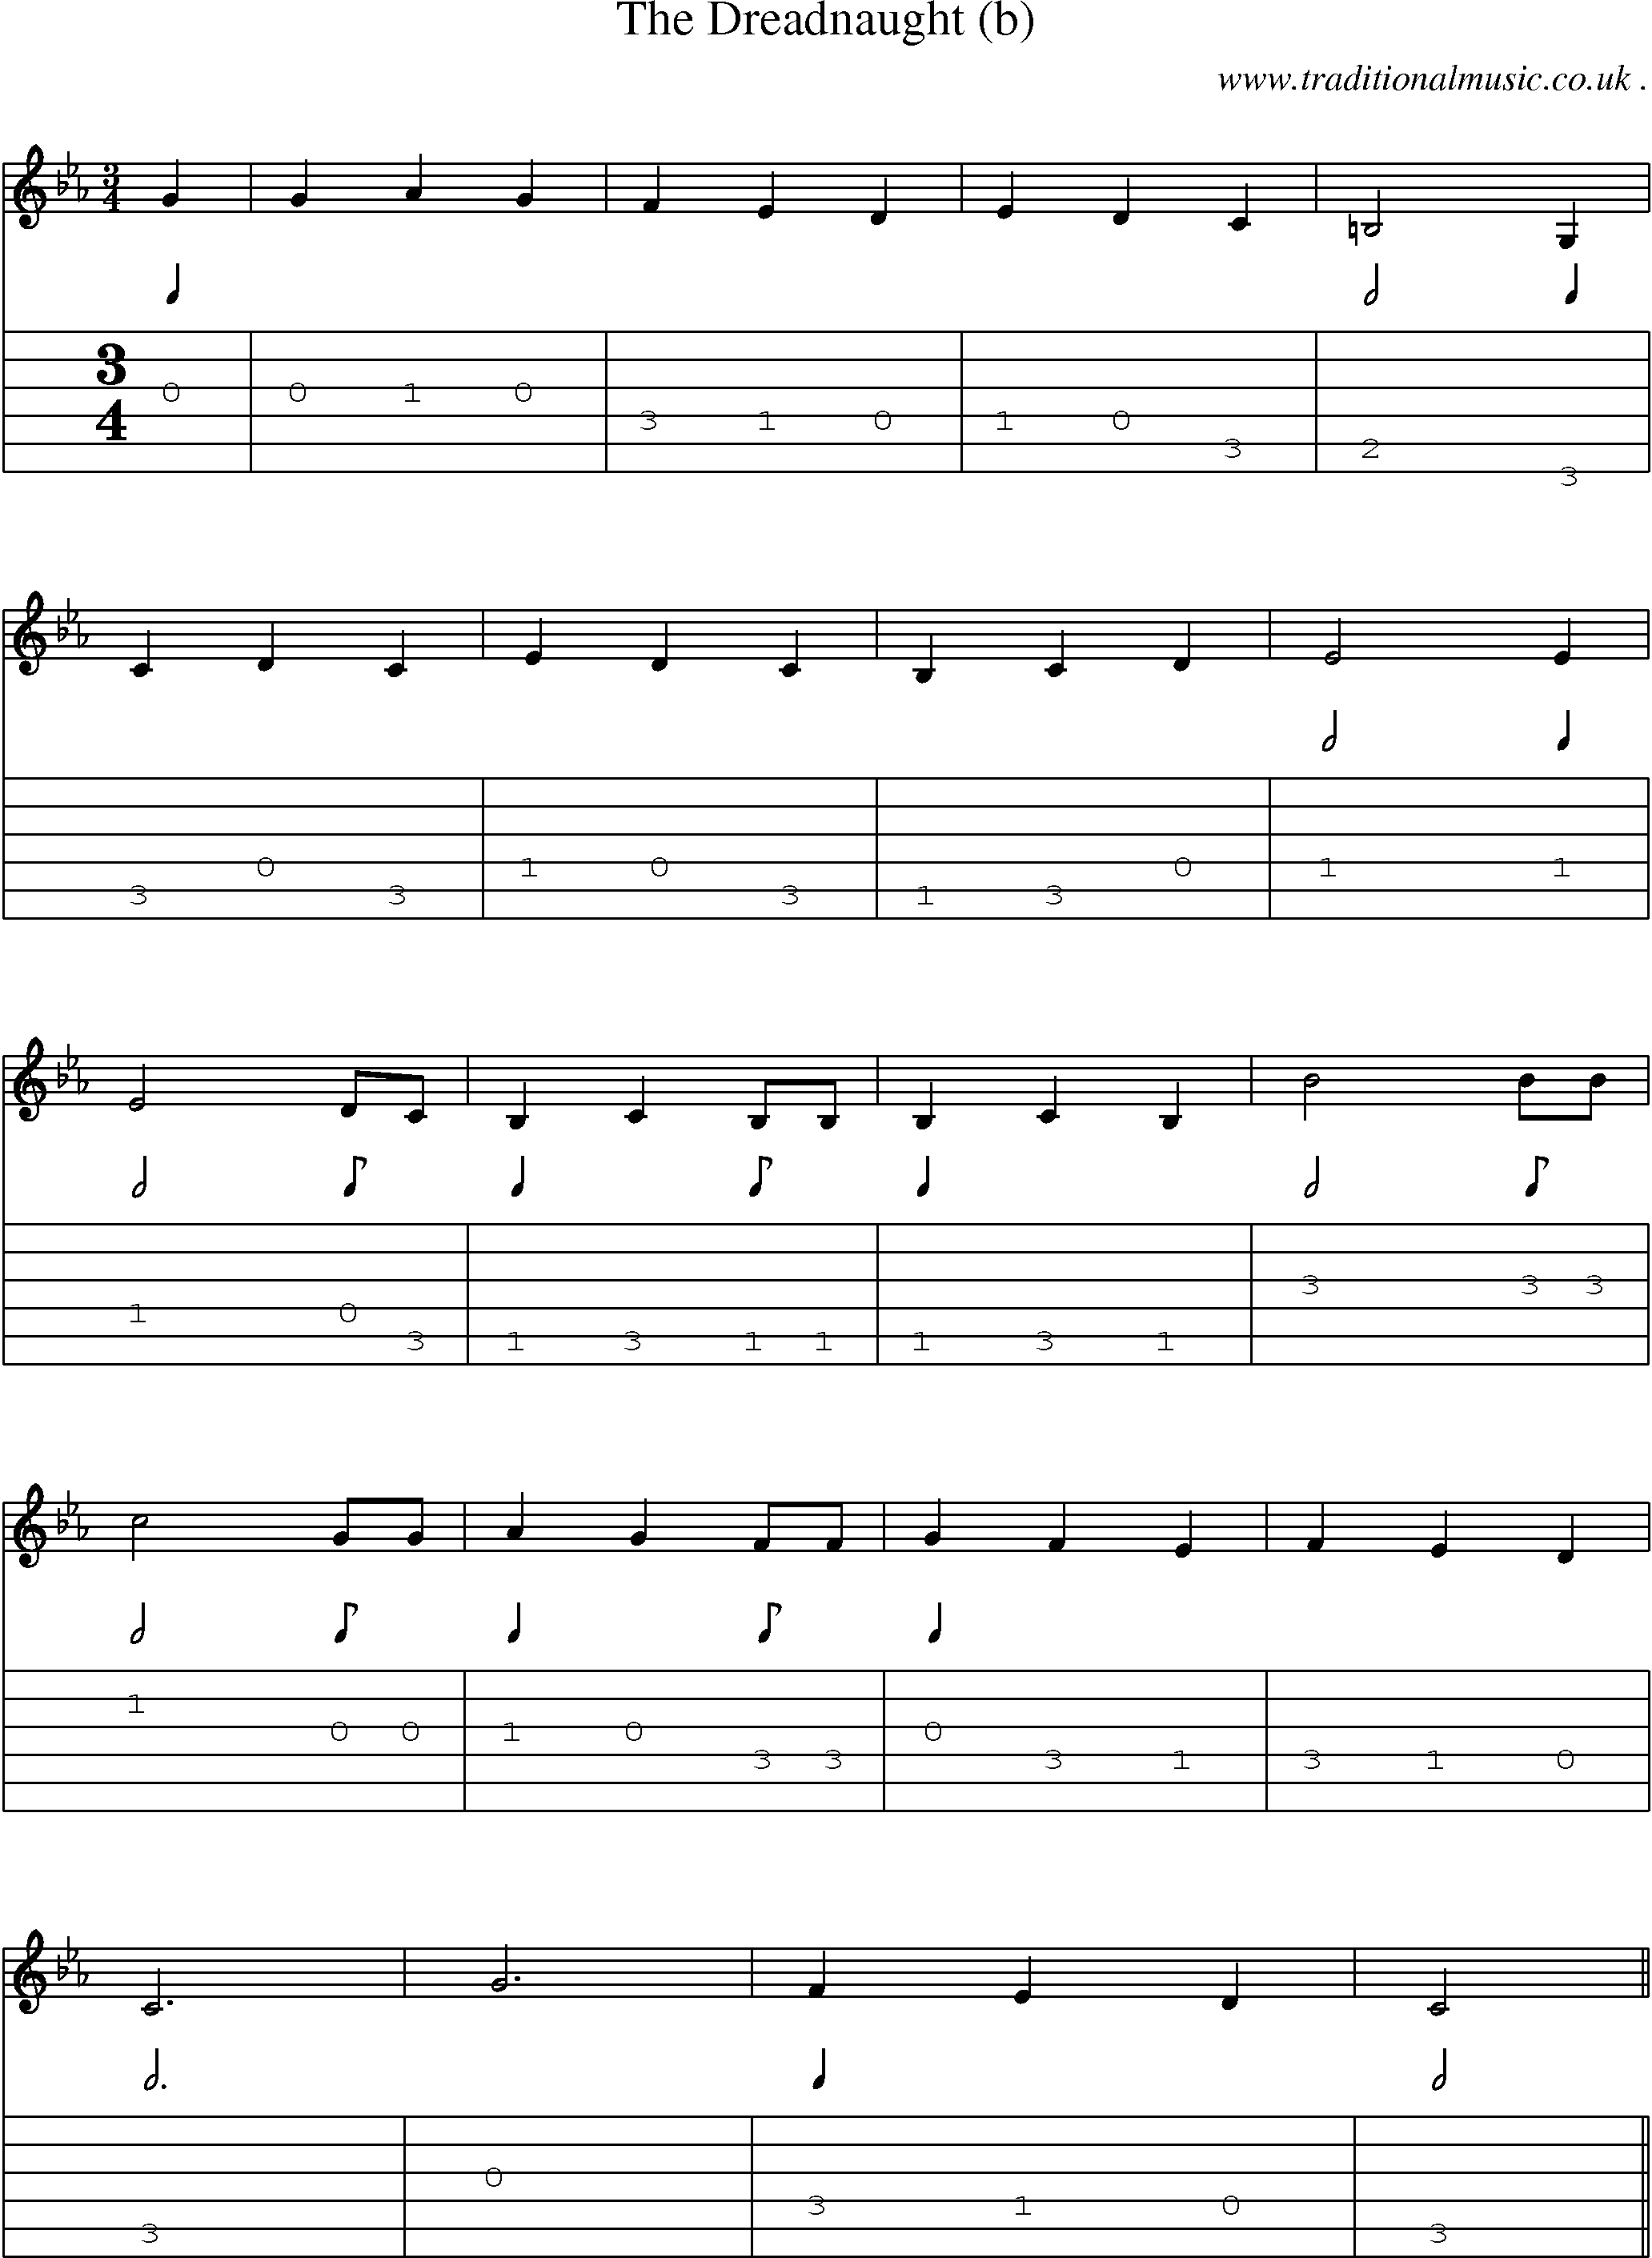 Sheet-Music and Guitar Tabs for The Dreadnaught (b)